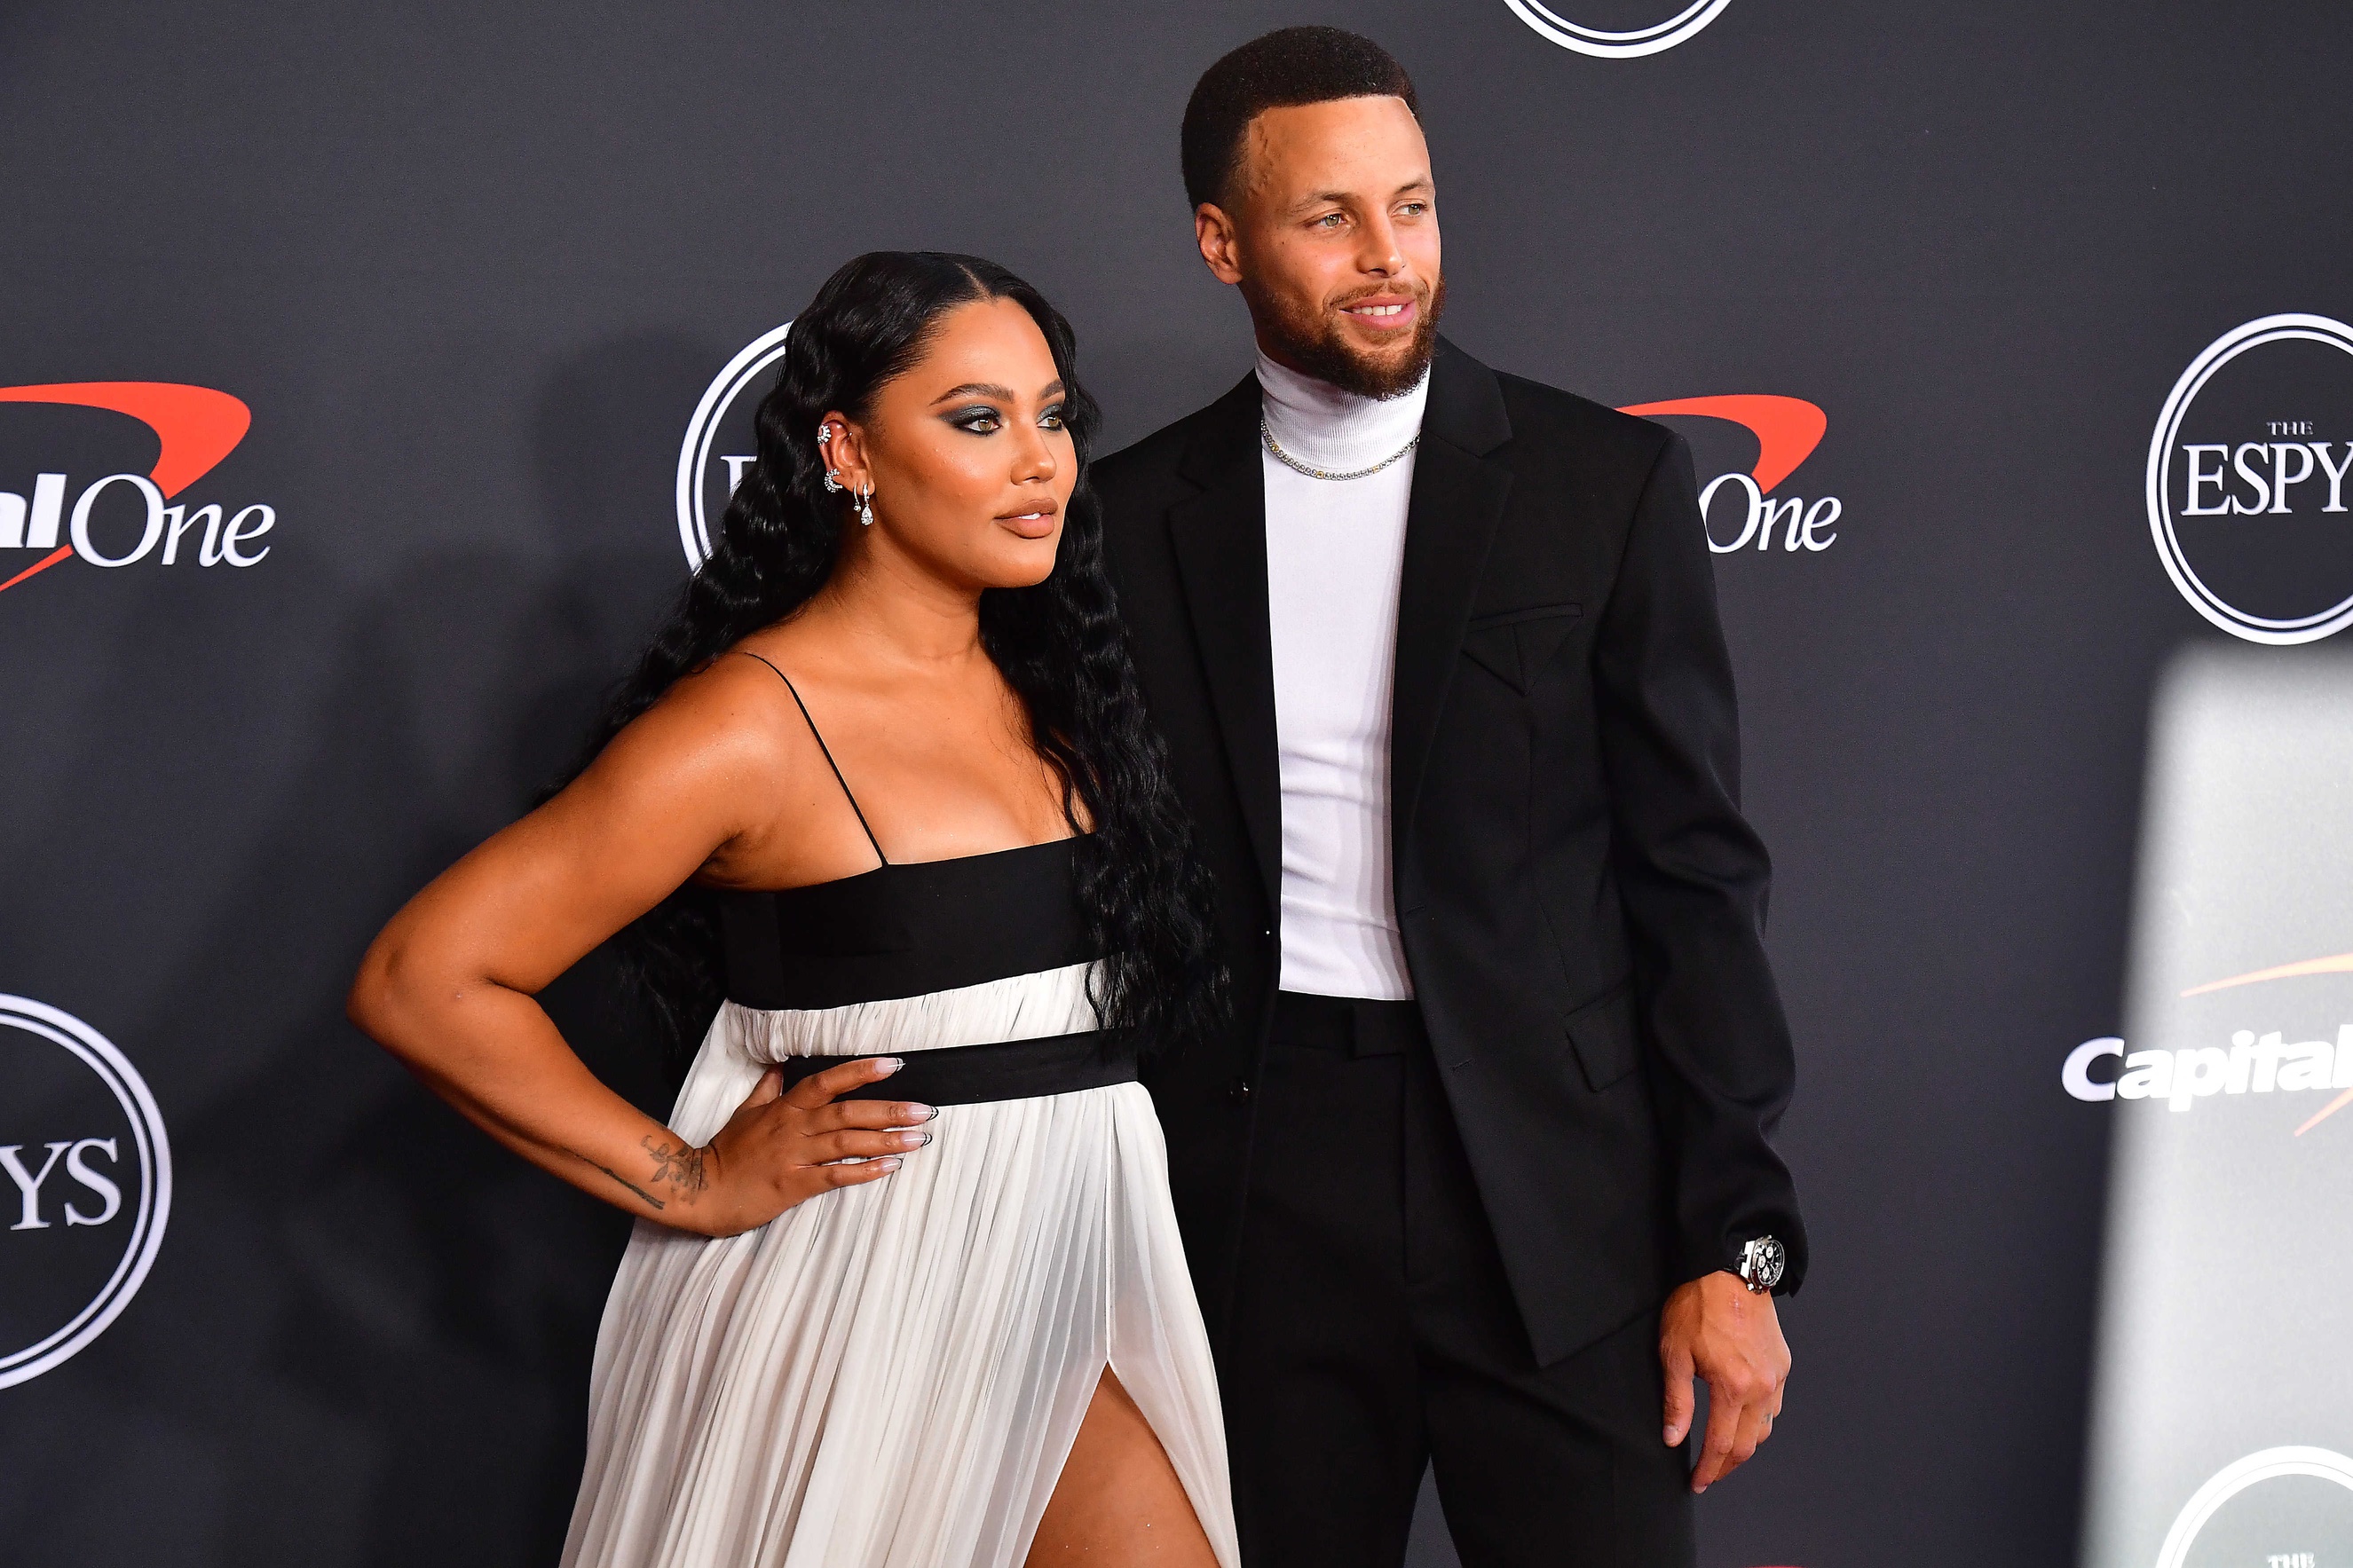 Golden State's Steph Curry Throws Shade at Miami Heat Fans During ESPYs - Sports Illustrated